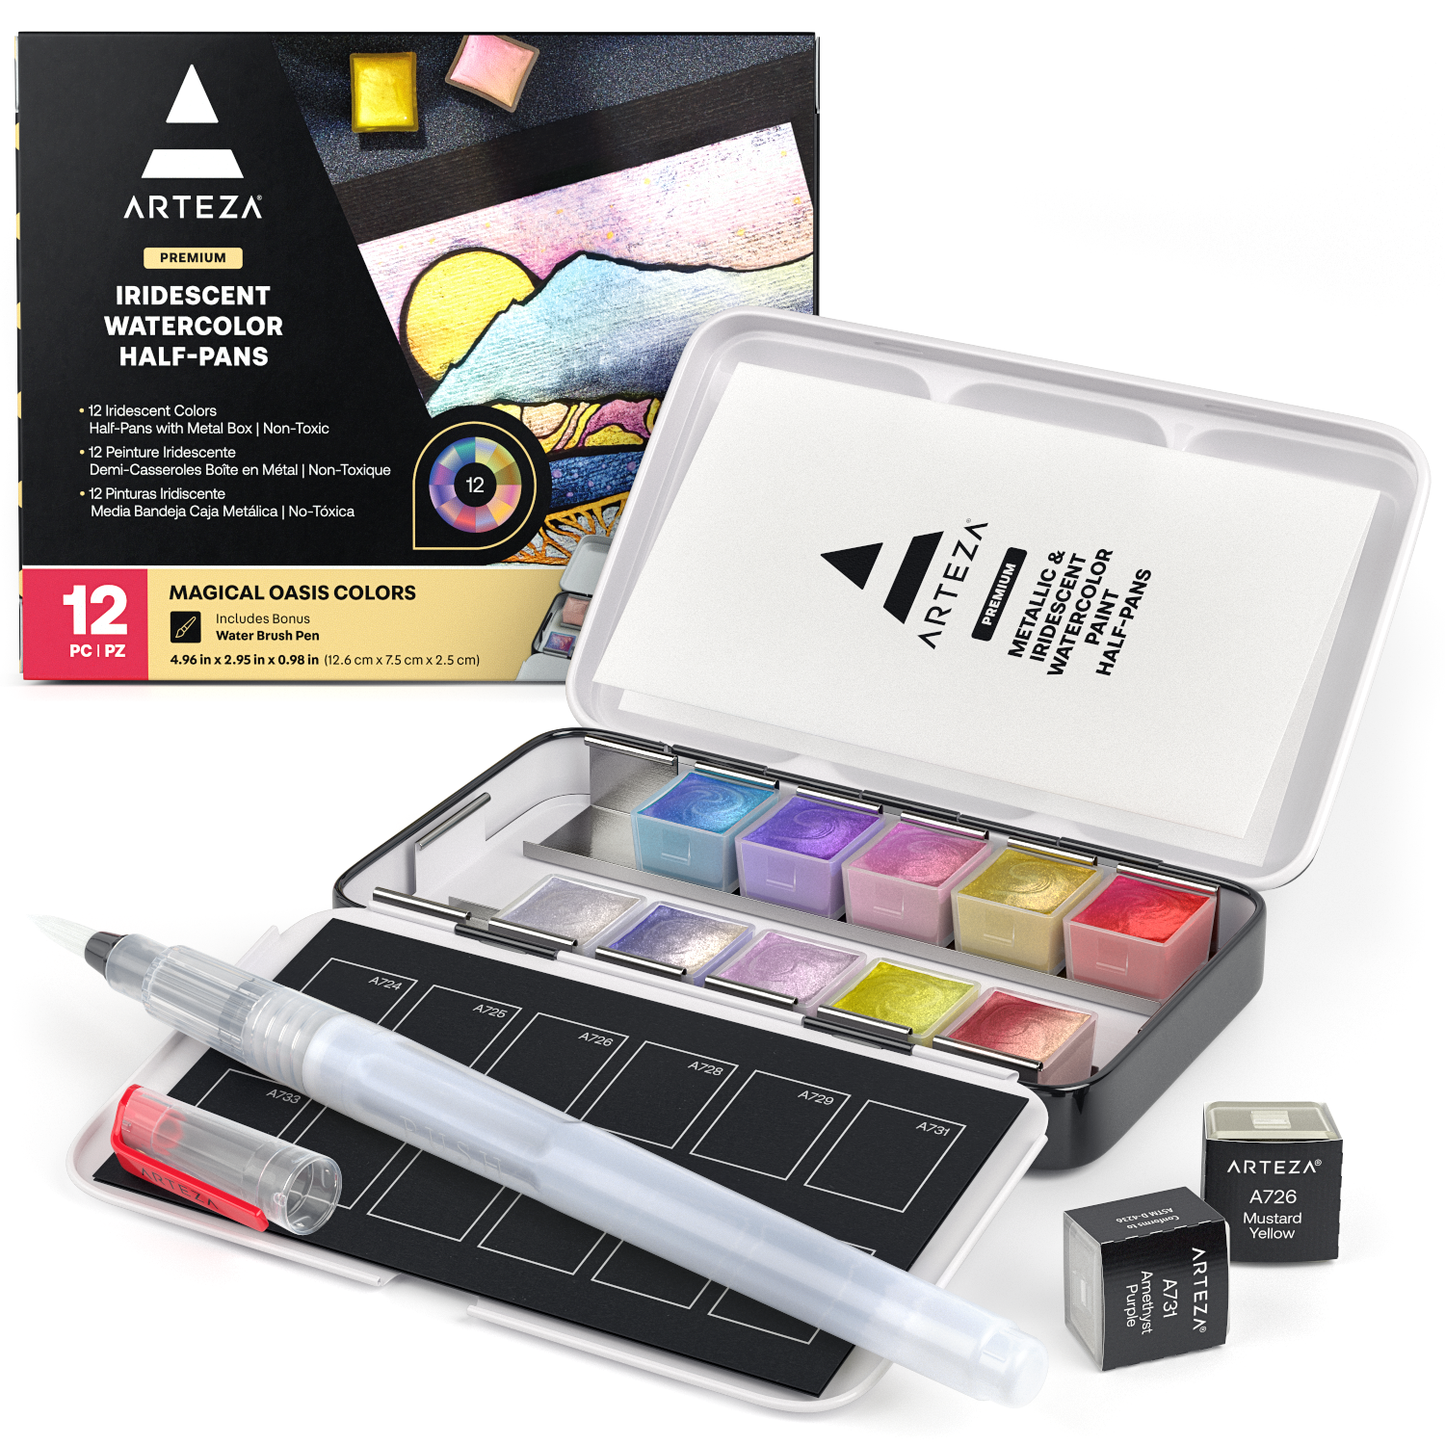 6 Assorted Glitter Shimmer Watercolor Painting Set